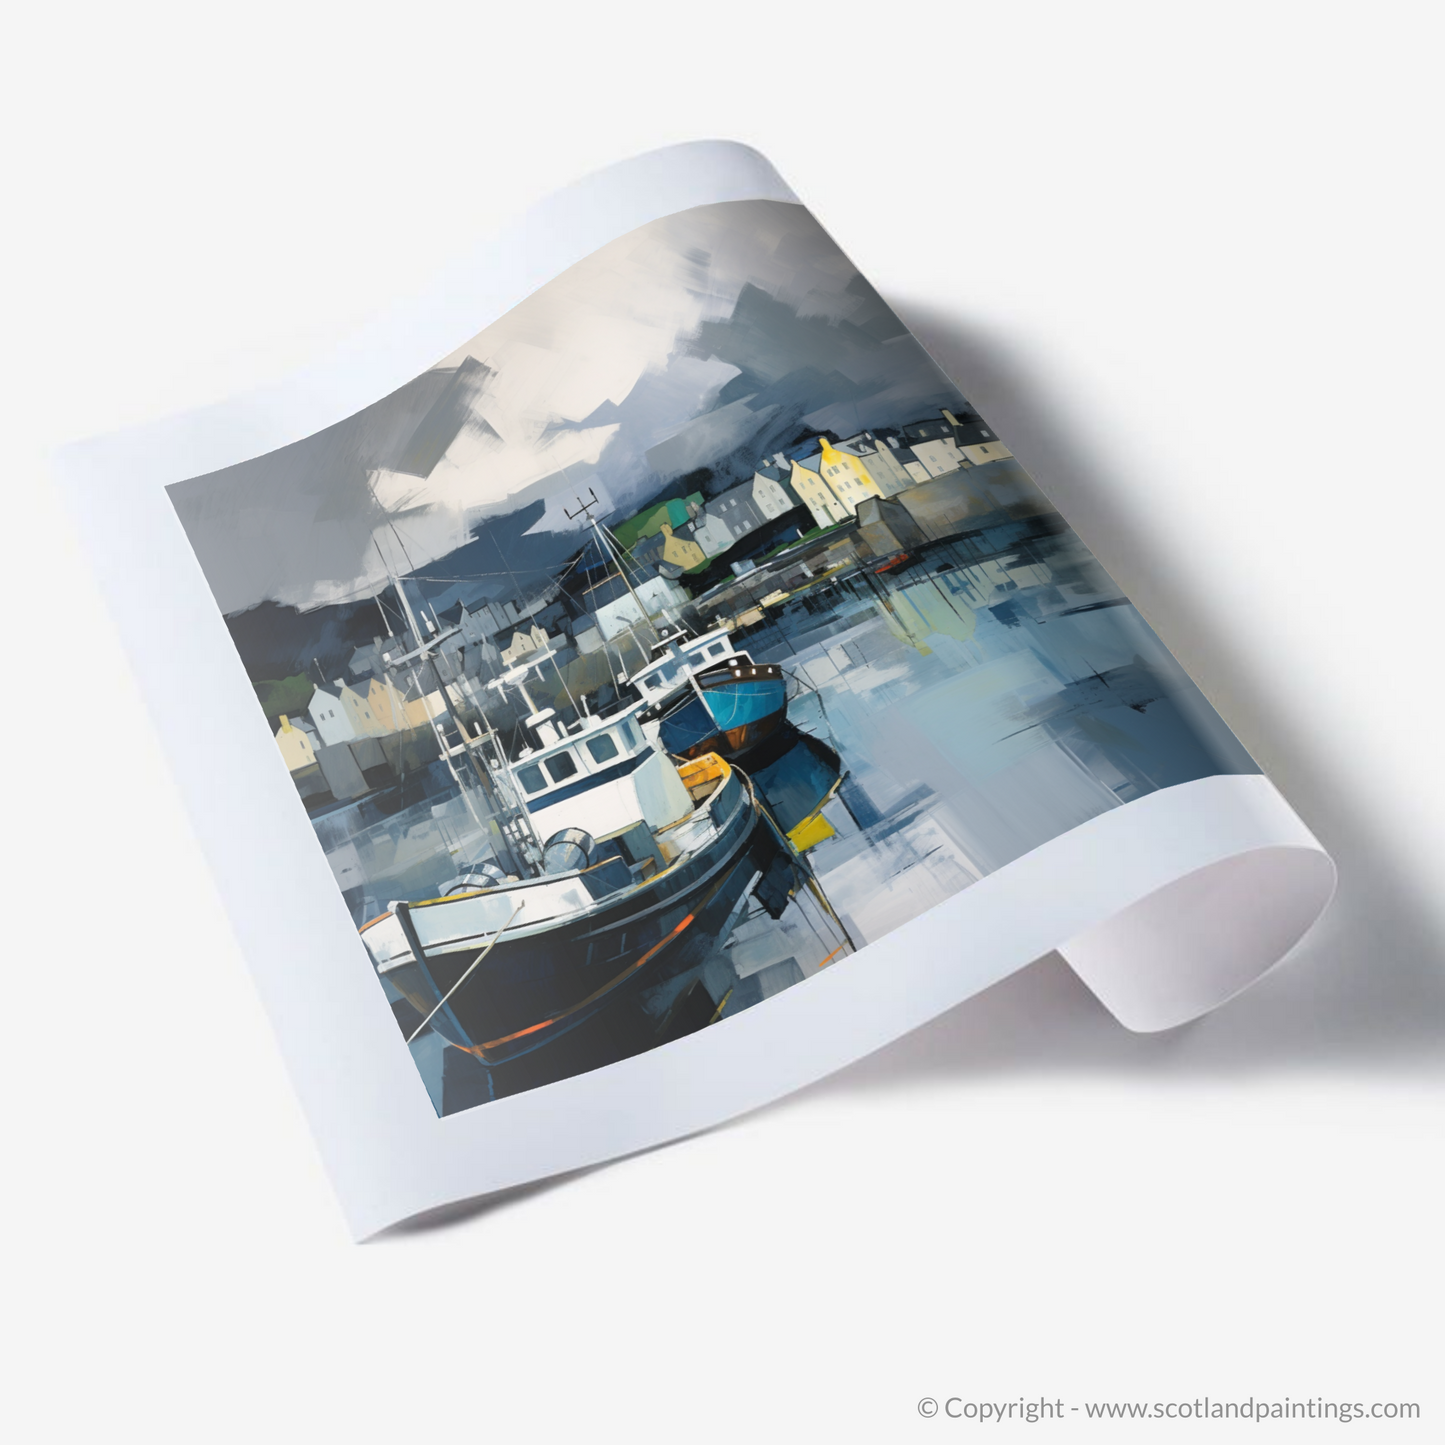 Storm over Oban Harbour: A Minimalist Homage to Scottish Seascapes